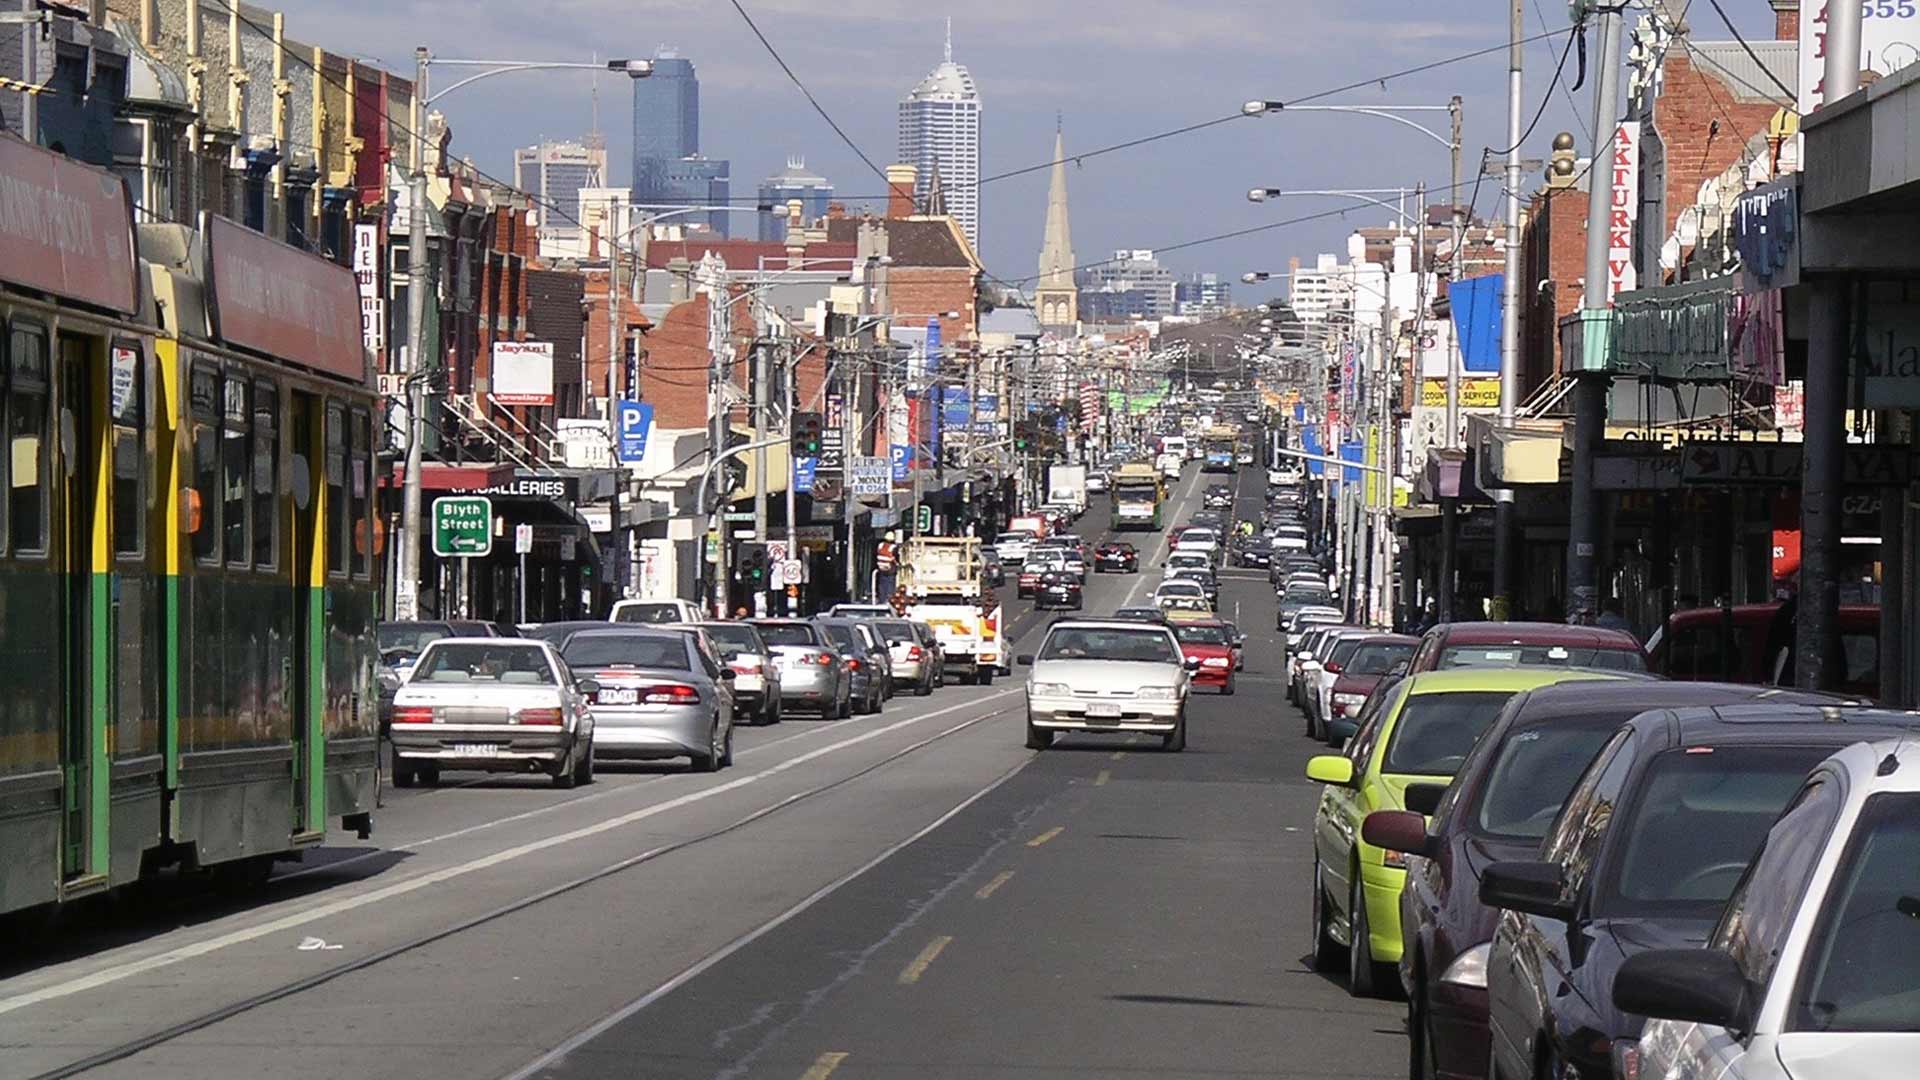 This Is What a Safer and More Cyclist-Friendly Sydney Road Could Look Like